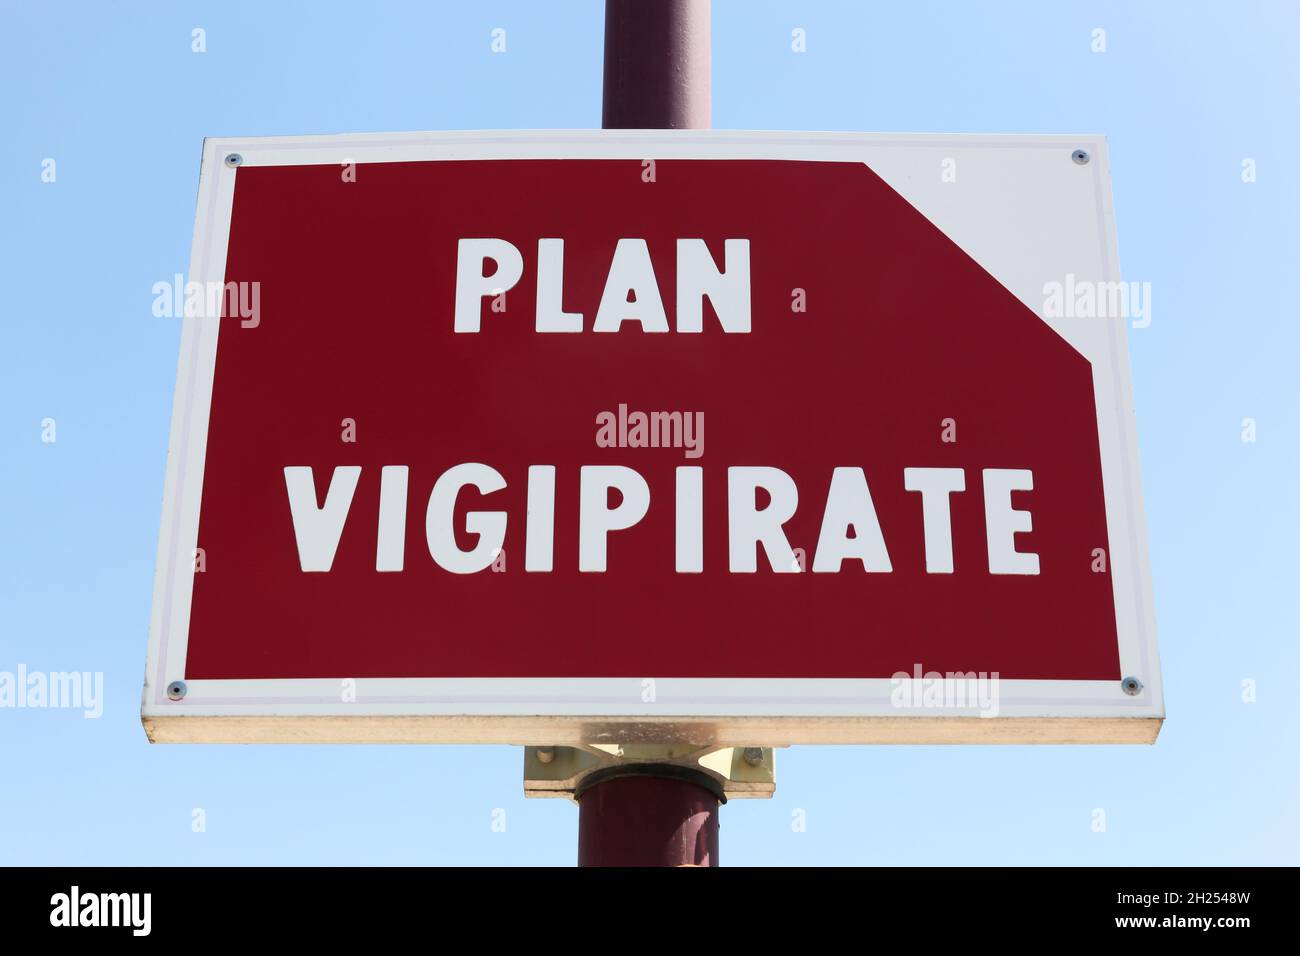 Plan vigipirate signboard on a pole. Plan vigipirate is the french national security alert system and against possible terrorist attacks Stock Photo